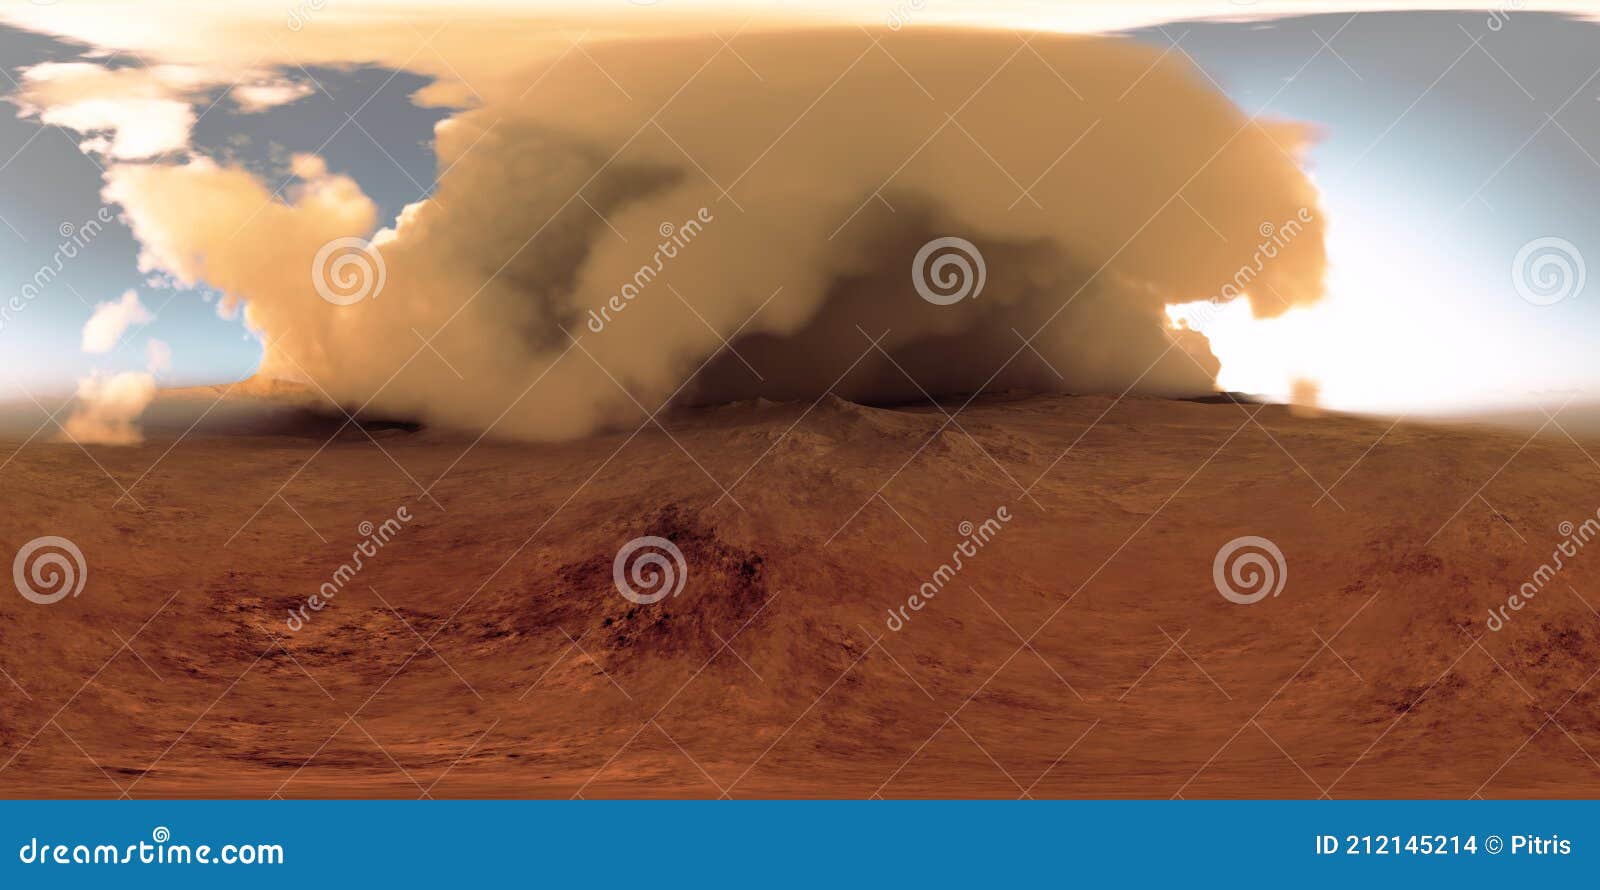 360 degree panorama of the massive dust storm sweeping across surface of mars. martian landscape, environment hdri map.